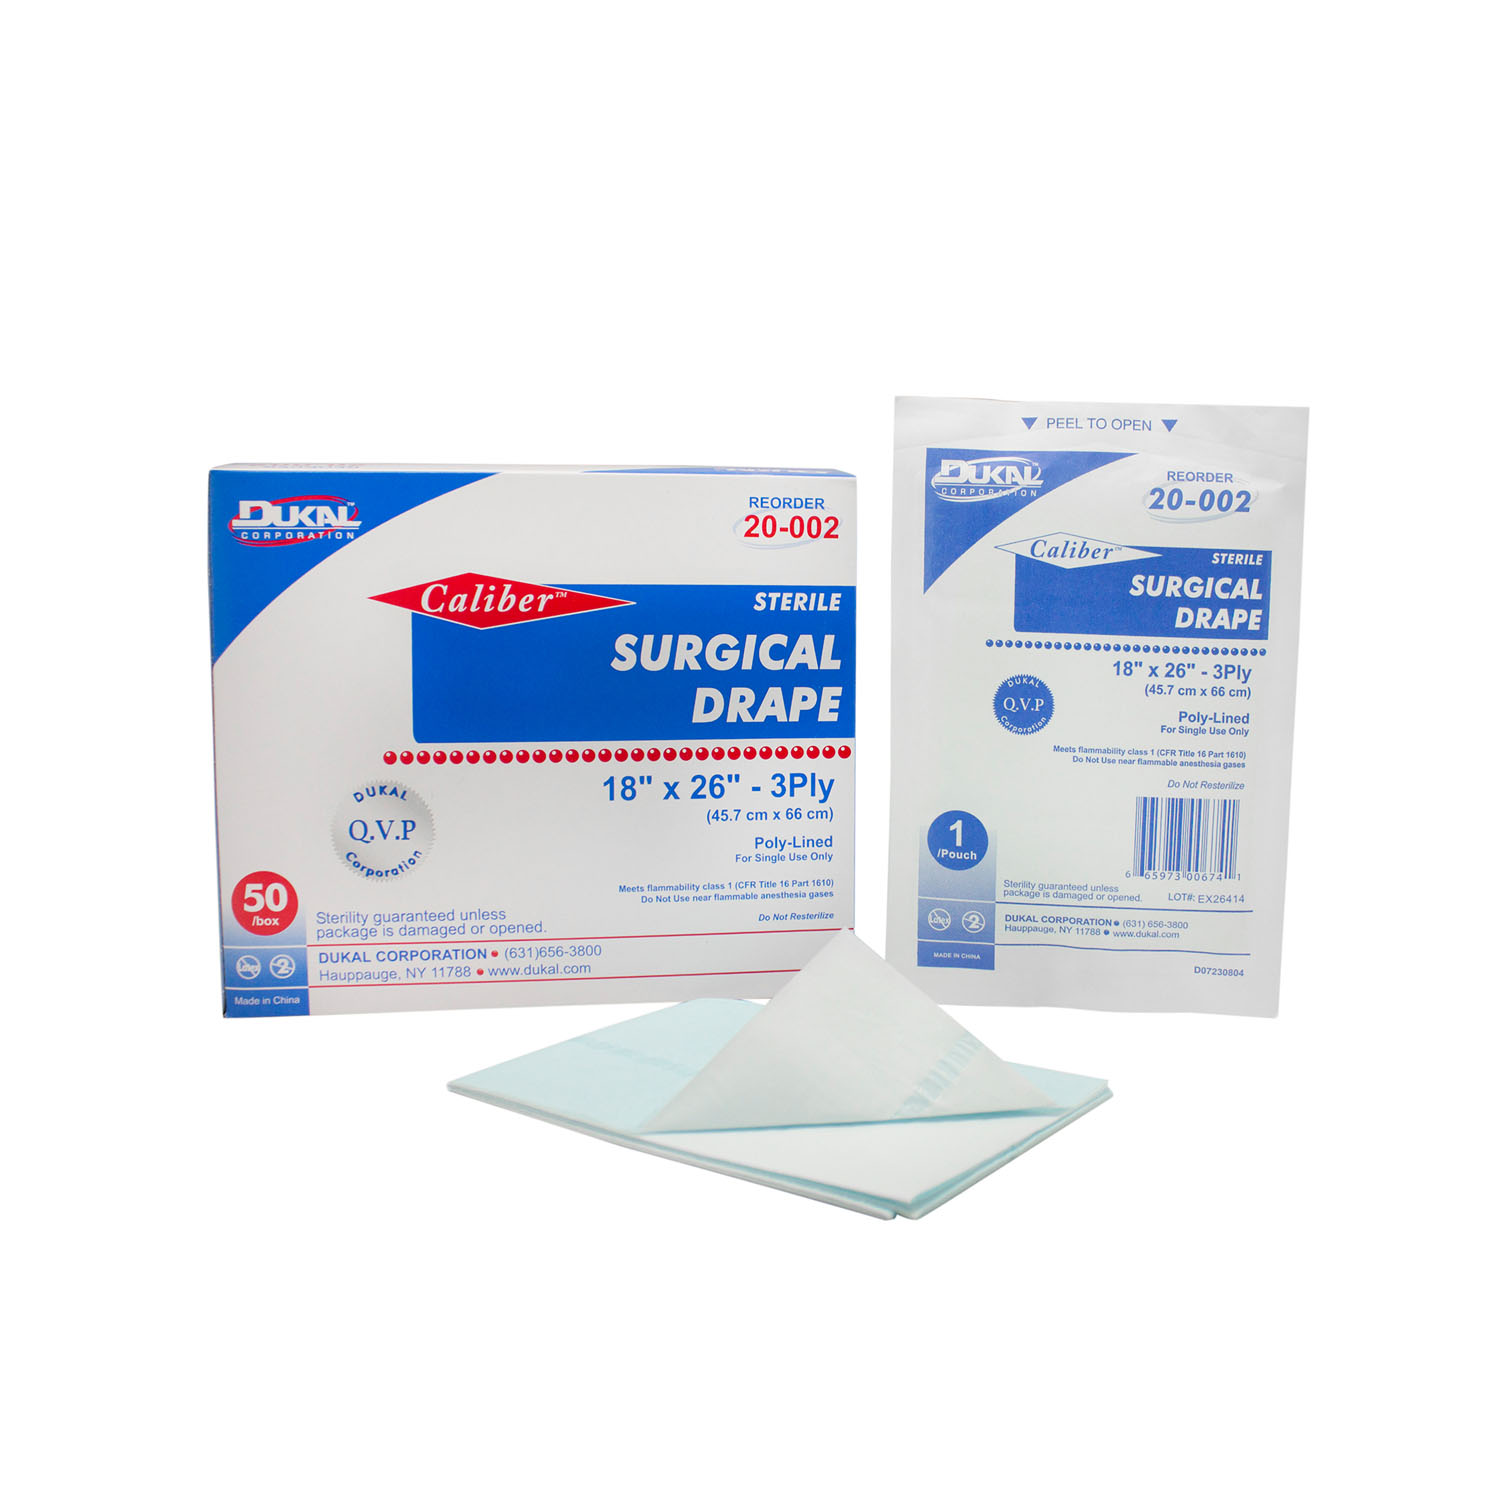 DUKAL SURGICAL DRAPES : 20-002 BX $20.50 Stocked